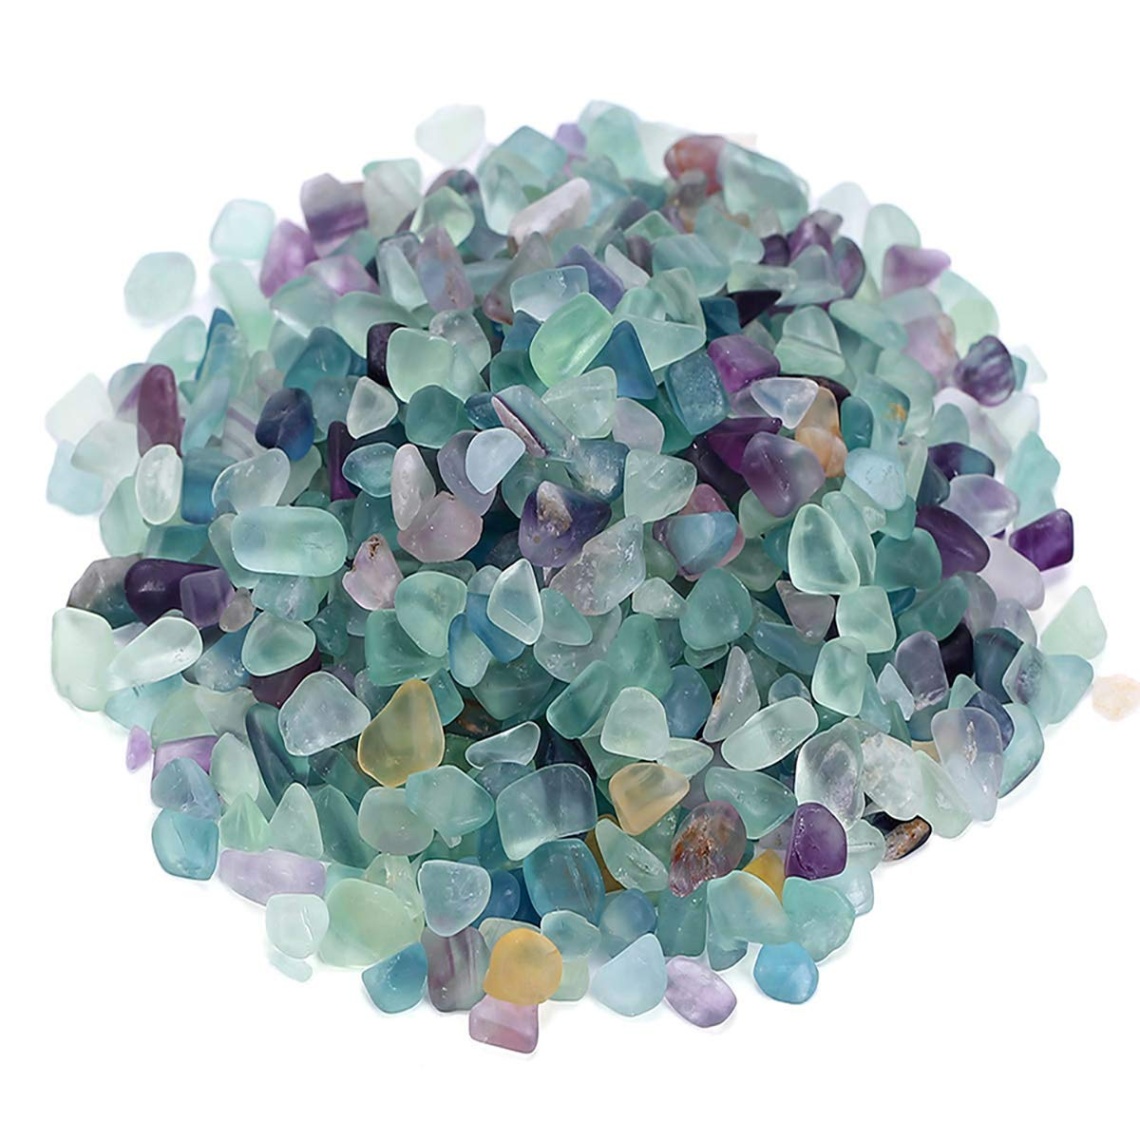 crystals for decoration Niche Utama Home WAYBER Decorative Crystal Pebbles,  Lb/g (Fill